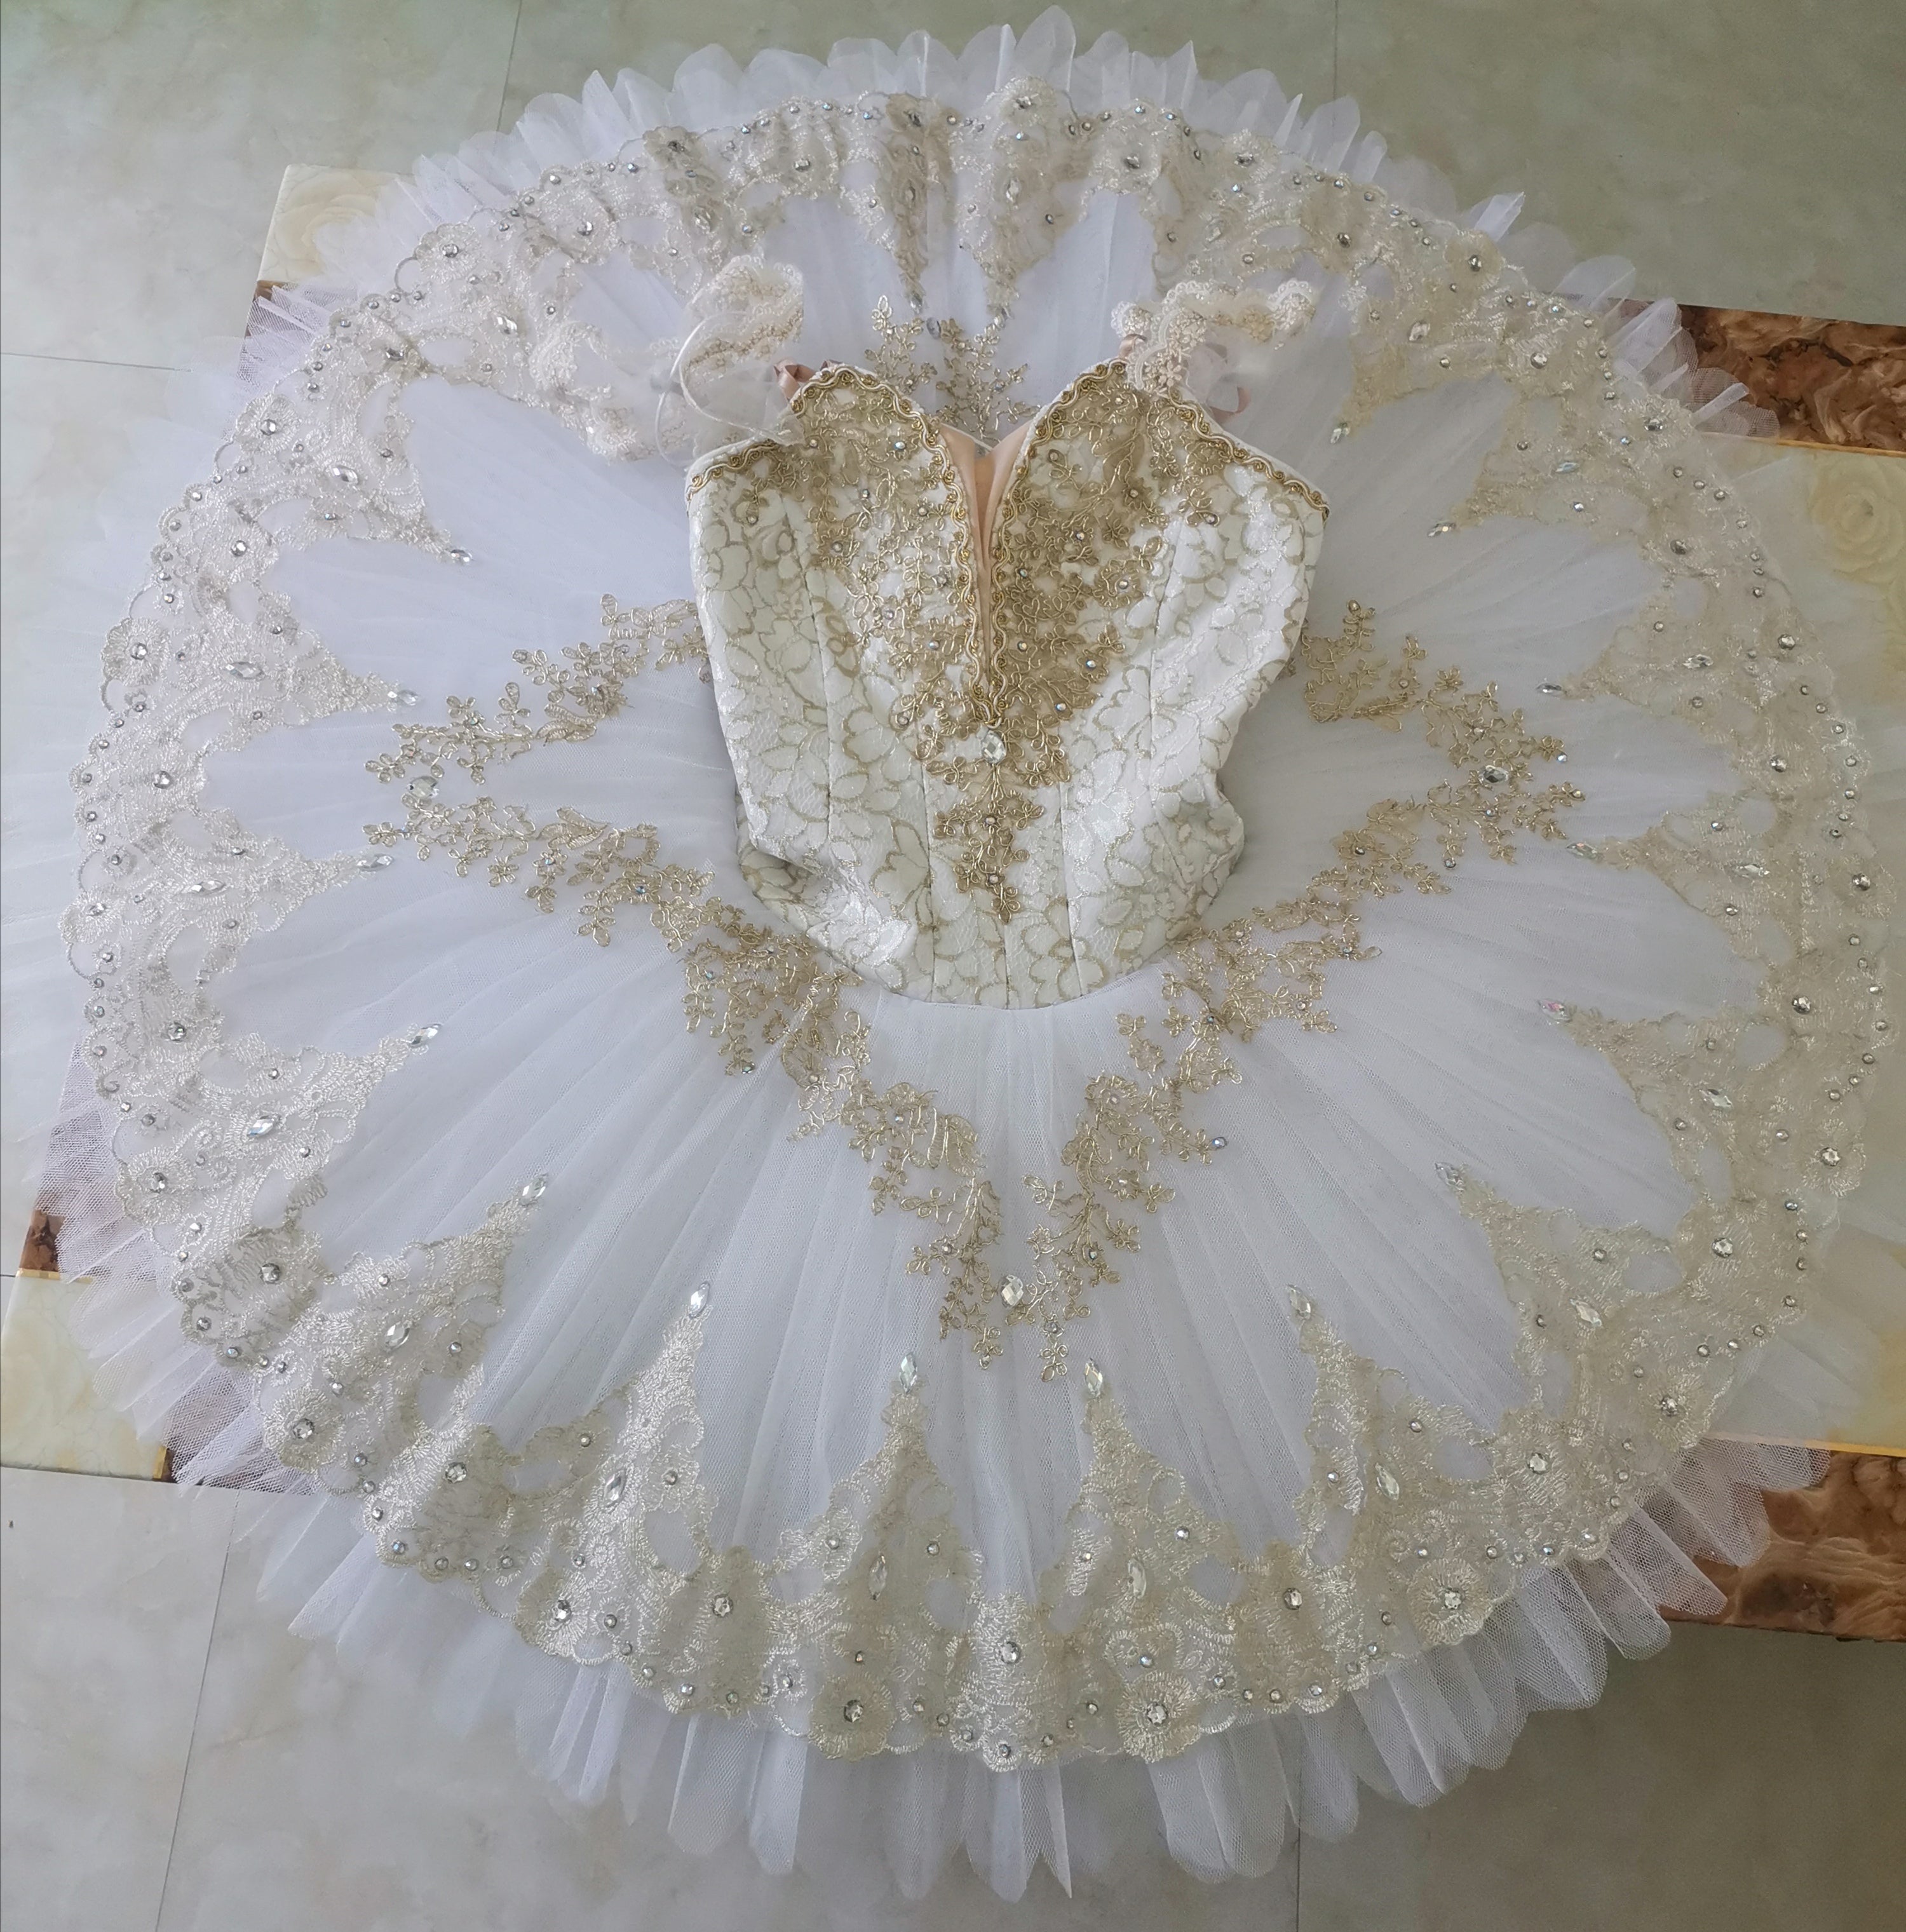 Variations of the Sugar Plum Fairy - Dancewear by Patricia